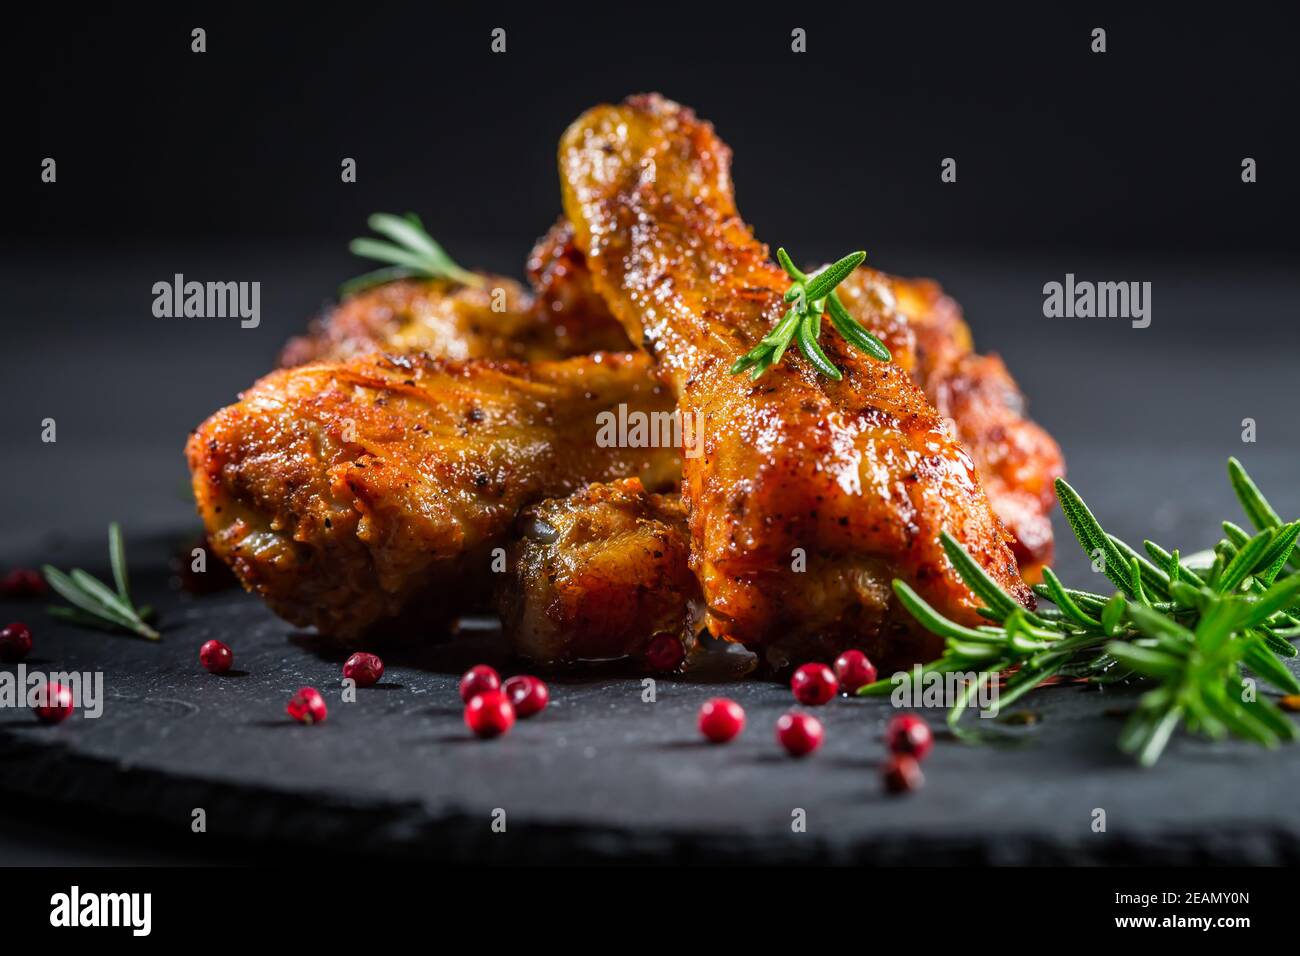 Hot spicy chicken legs with herbs on black background Stock Photo